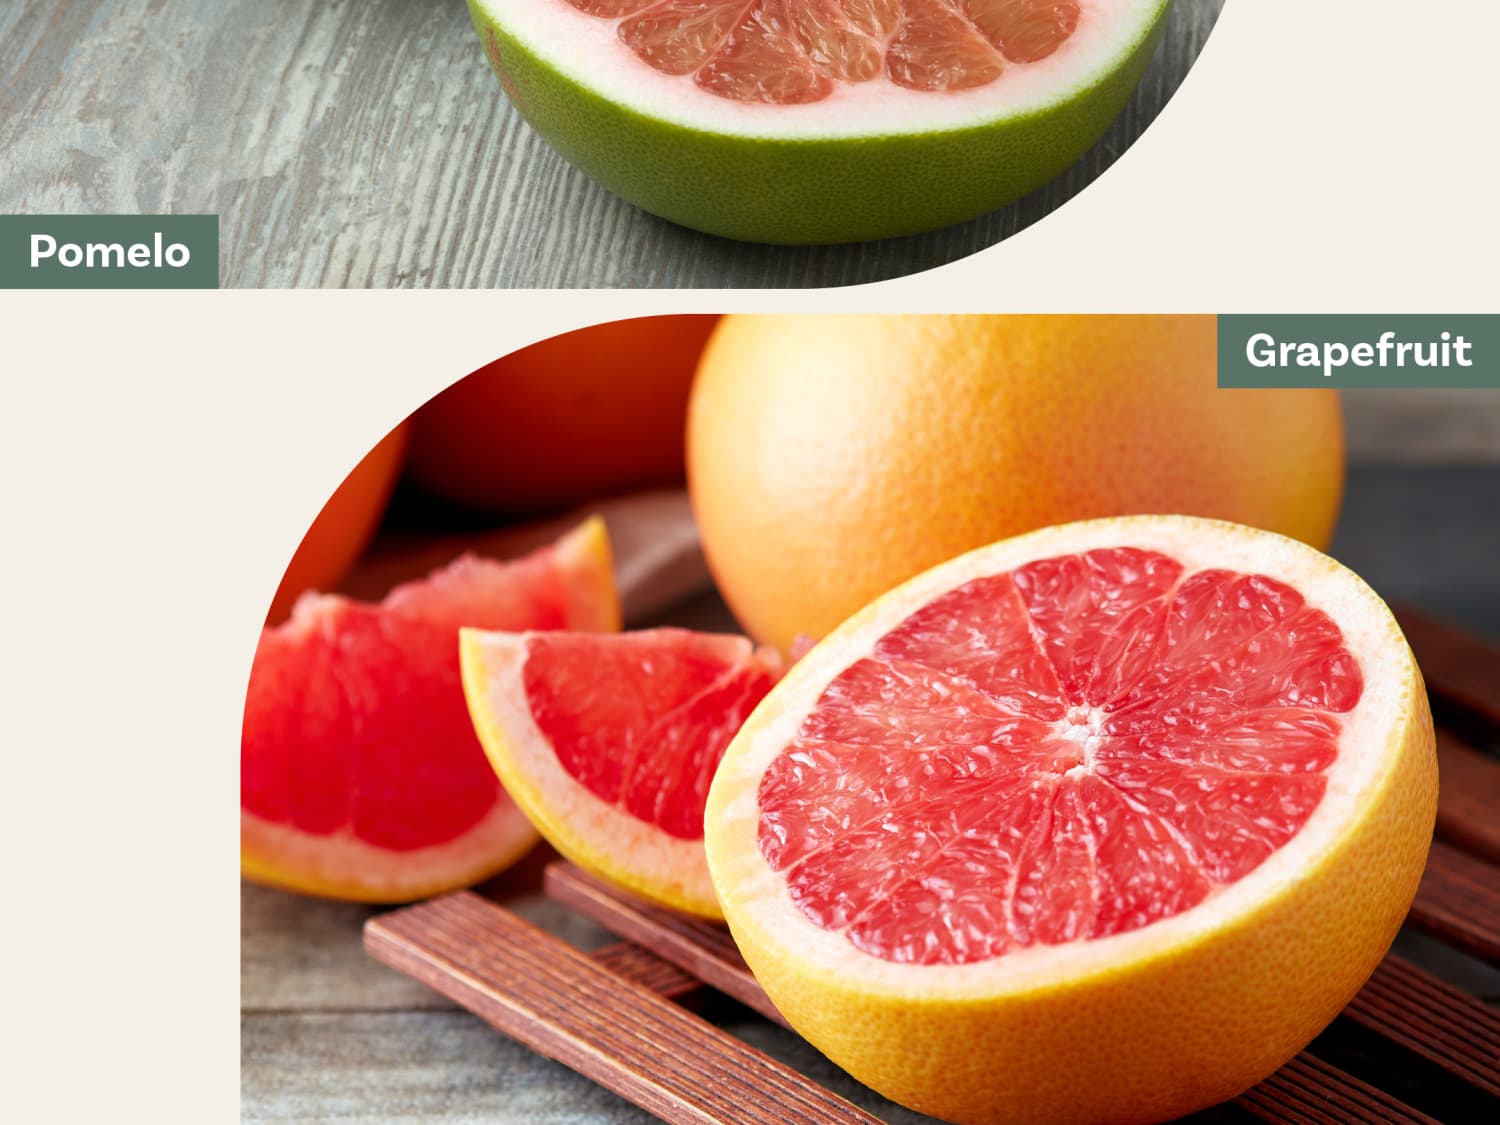 Pomelo vs. Grapefruit: What's the Difference Between the Two